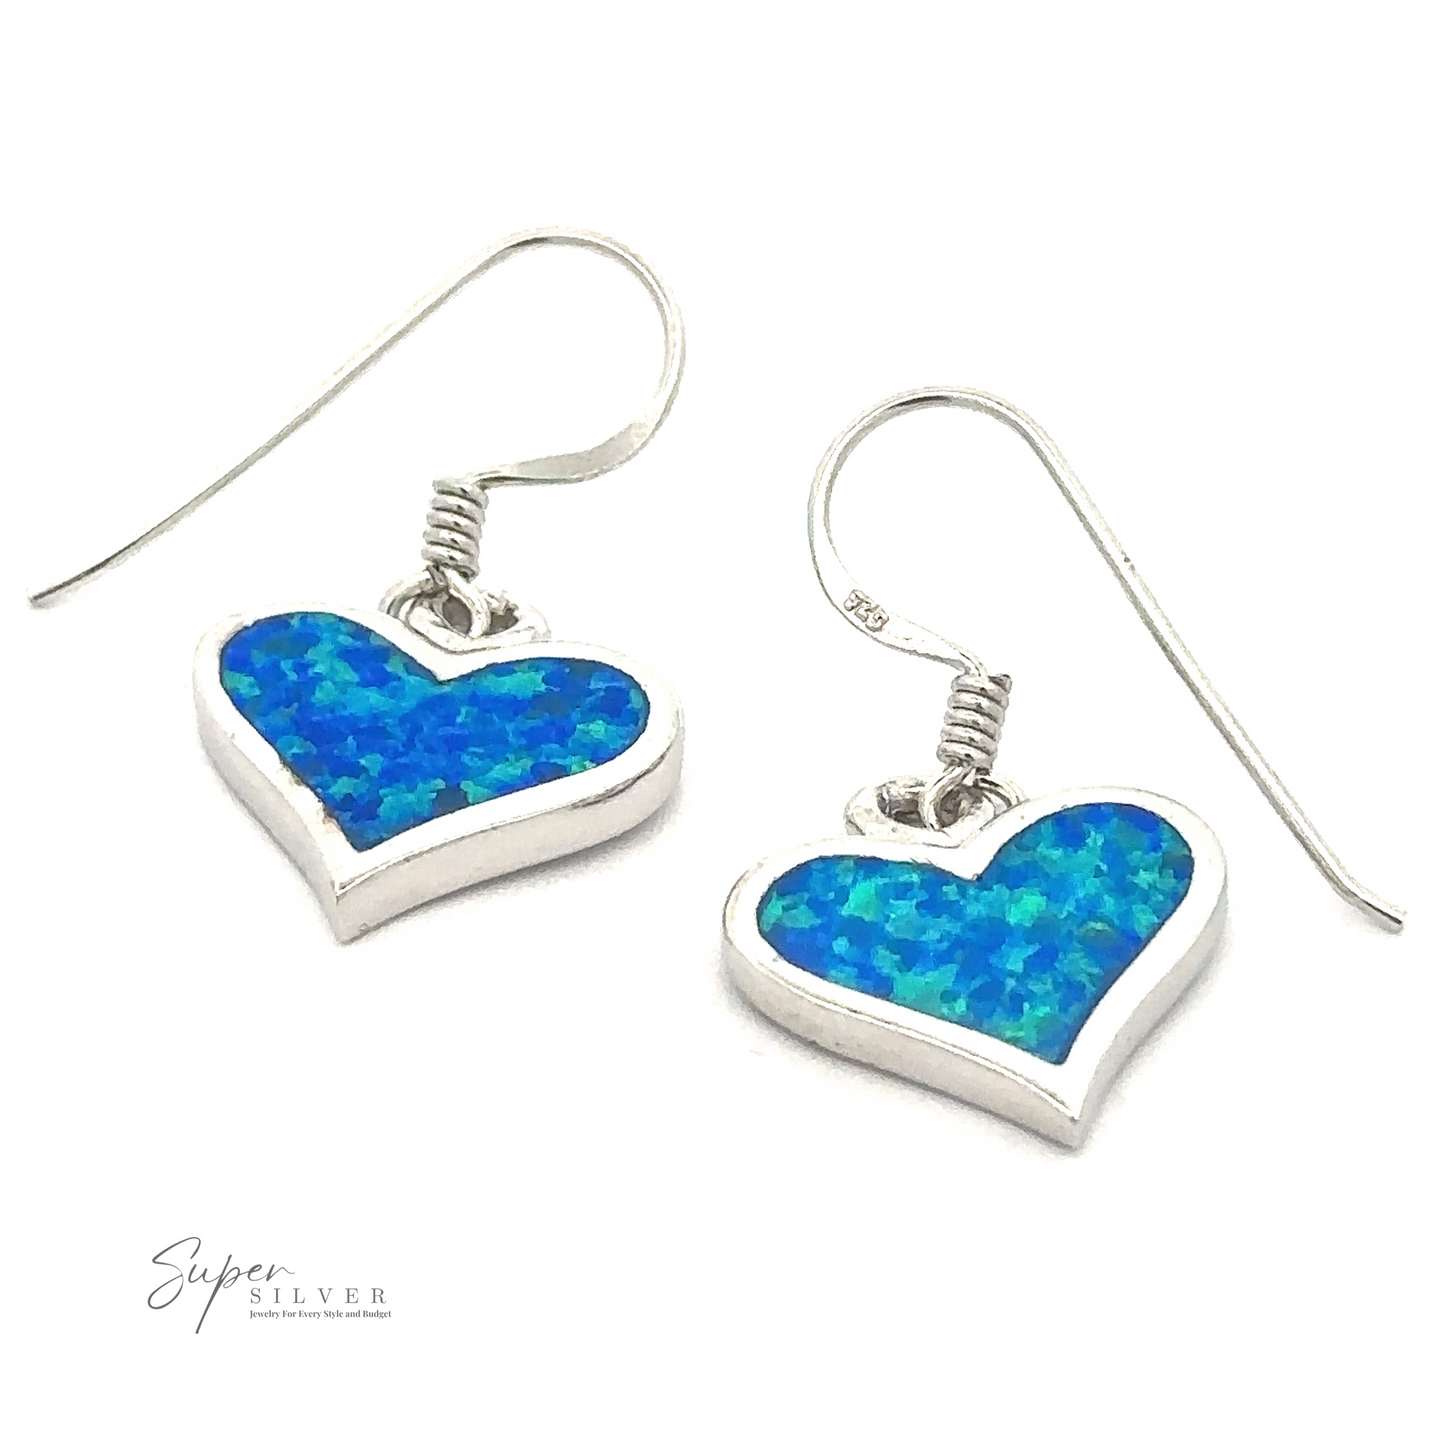 A pair of rhodium-plated, silver Lab-Created Opal Heart Earrings featuring a blue created opal inlay with a textured appearance. The ear hooks are simple and curved, while the "Super Silver" logo is visible in the bottom left corner.